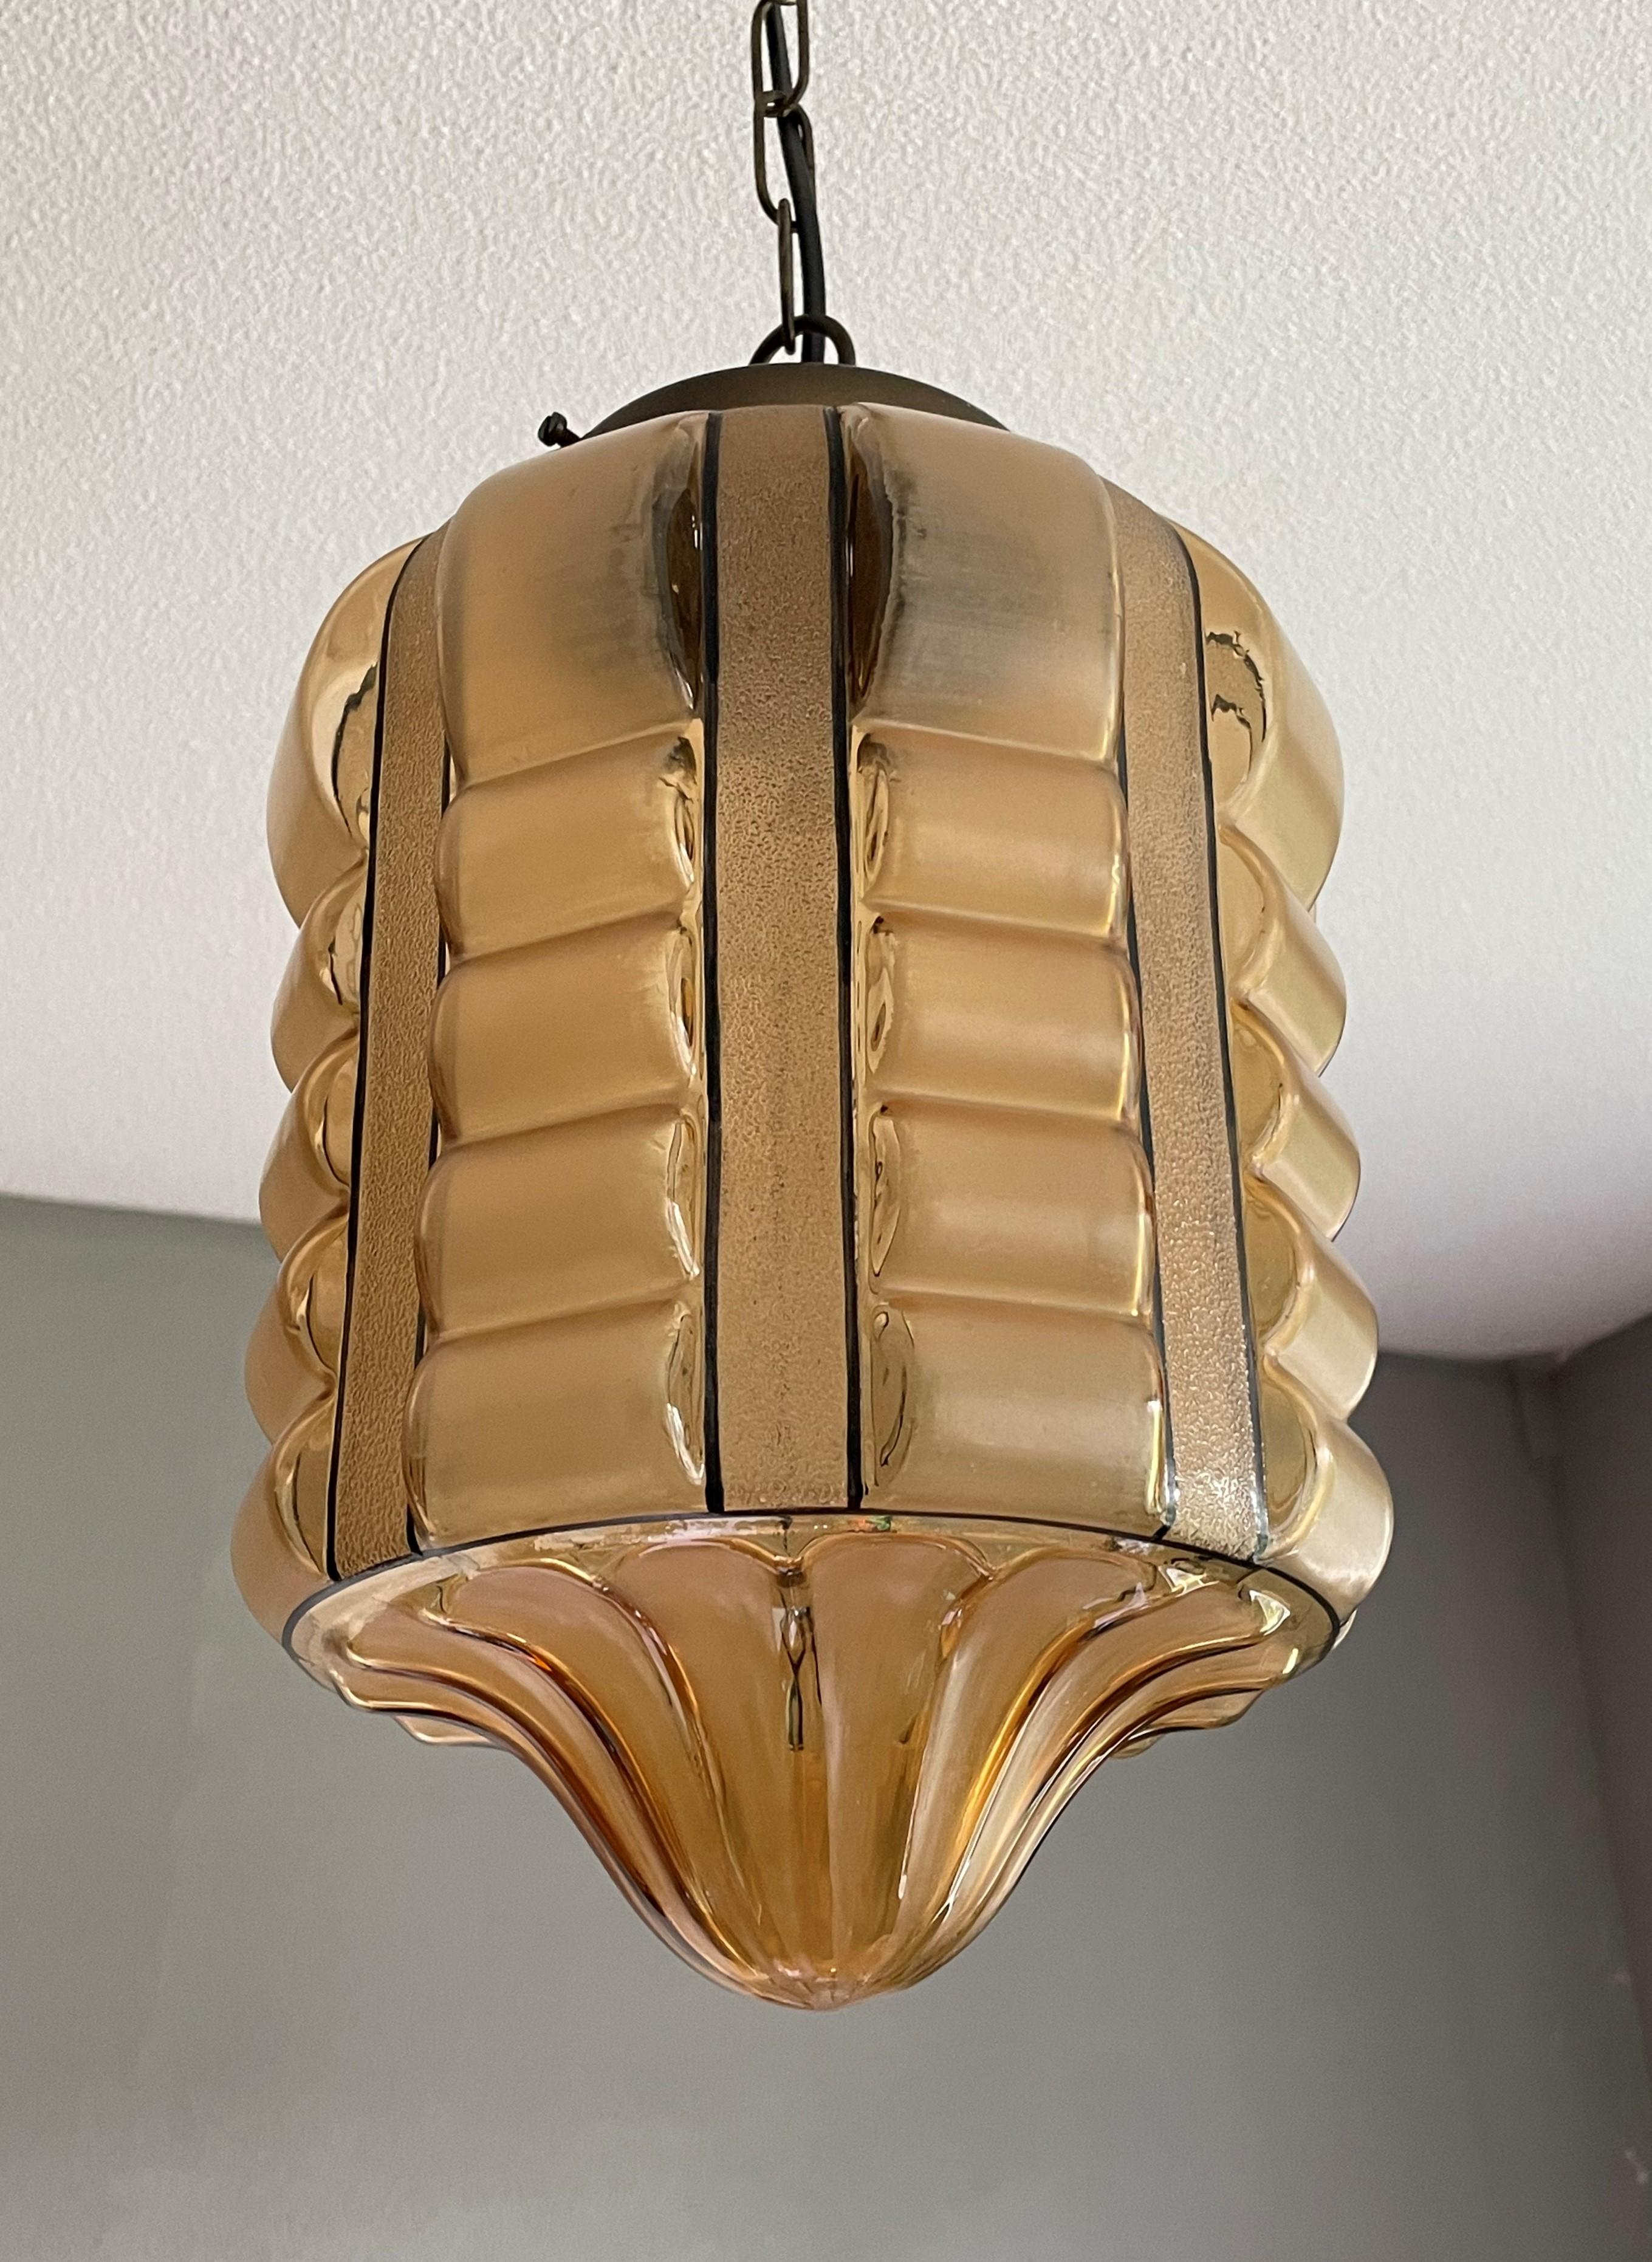 Rare Rounded Geometrical Design Art Deco Pendant Light with Brass Chain & Canopy 12